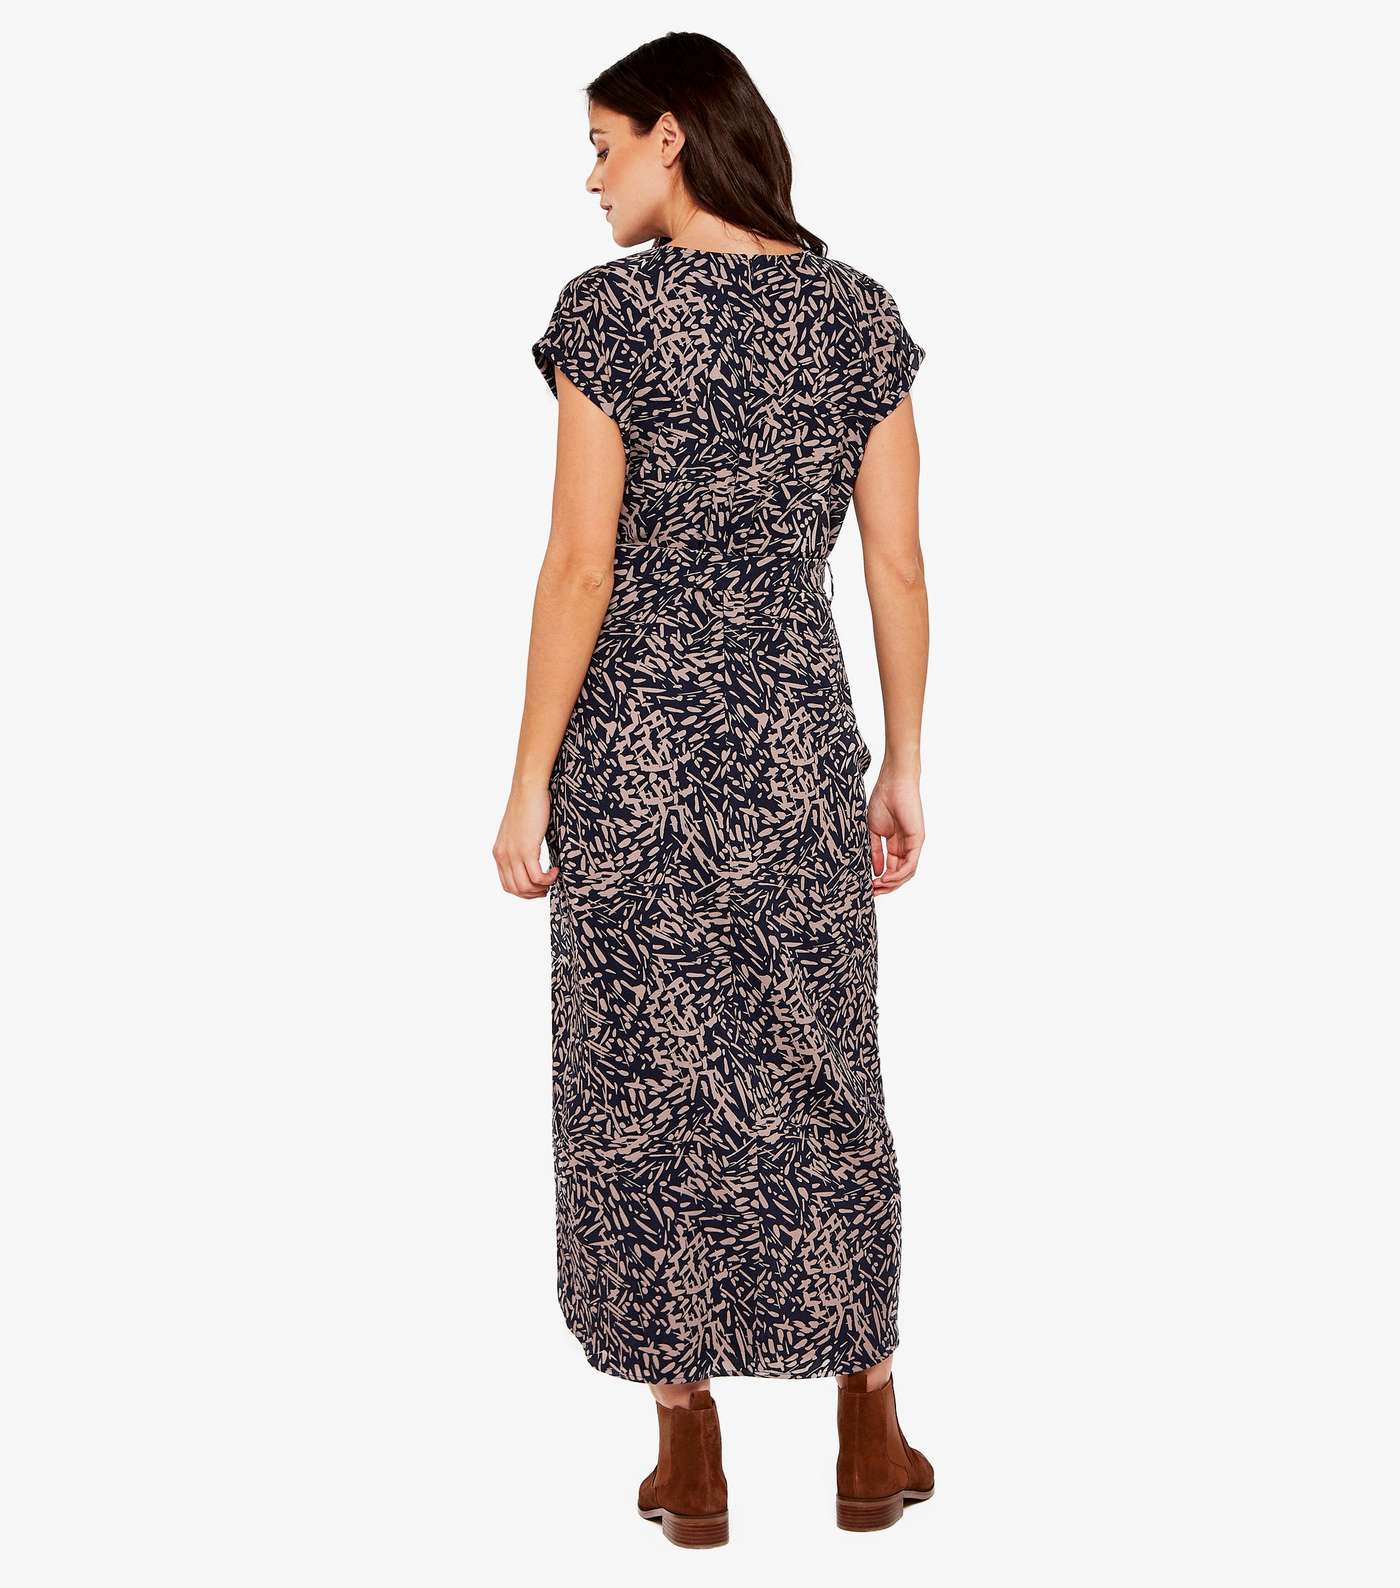 Apricot Navy Abstract Crepe Wrap Dress Image 3